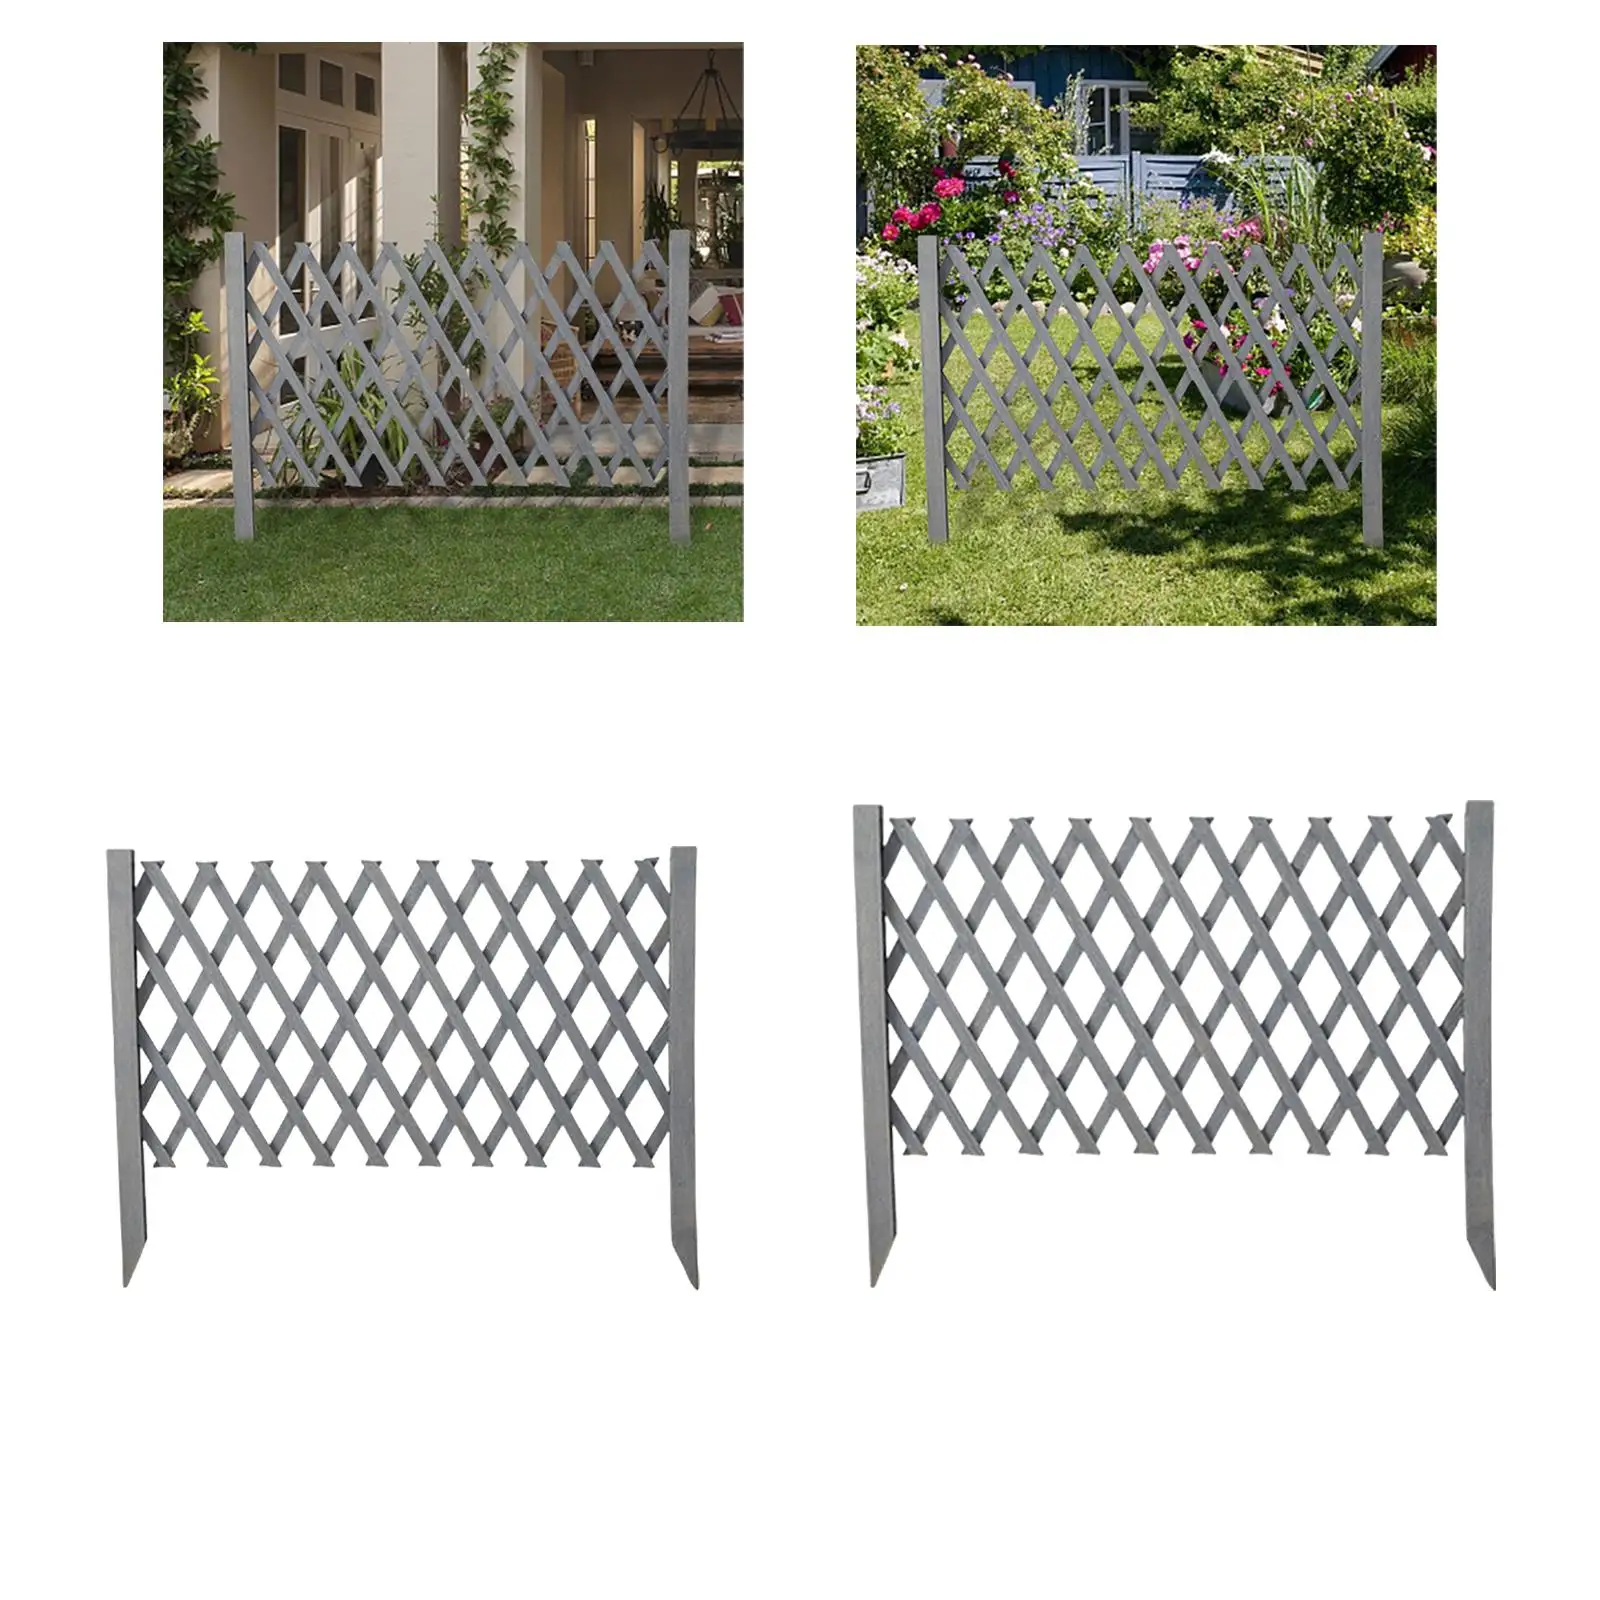 Garden Trellis Fence Indoor Outdoor Pet Gates Wood Fence Partition Expanding Expandable Wooden Fence for Wedding Prop Backyard